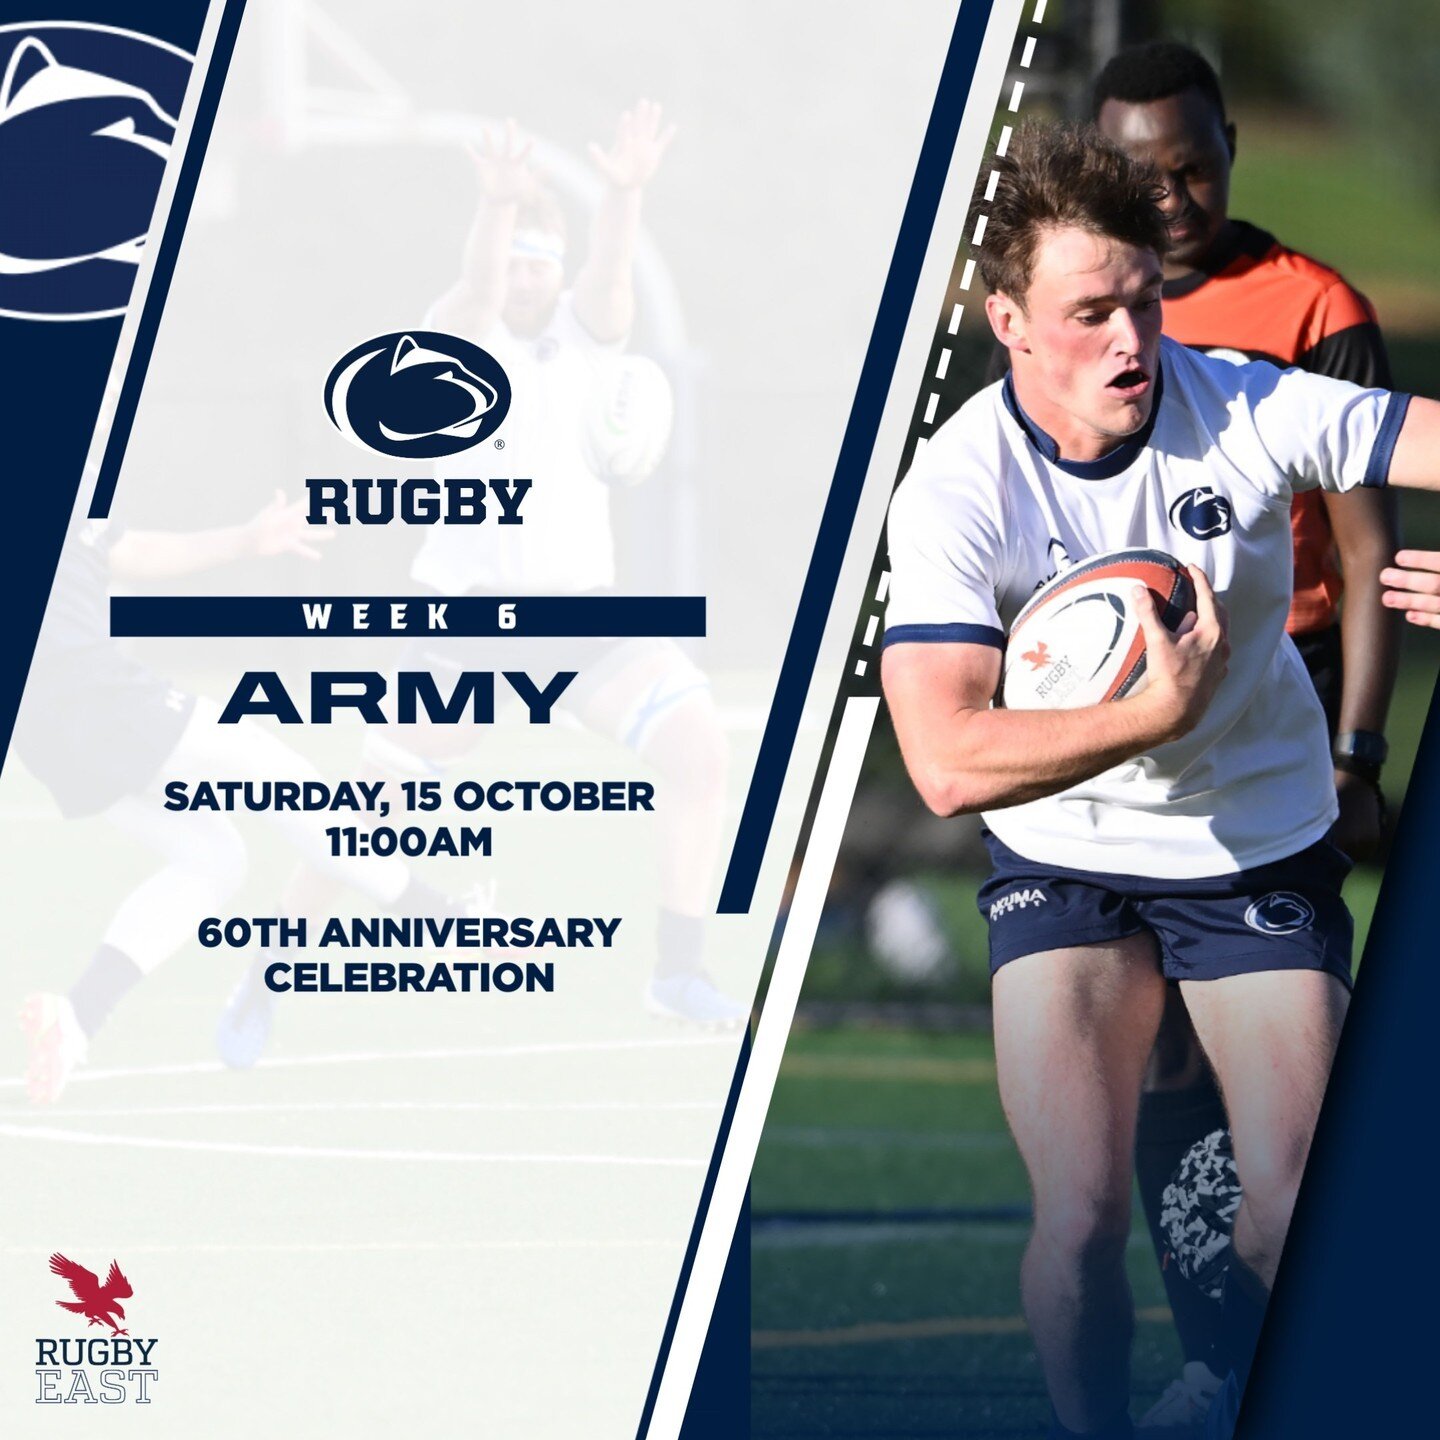 This weekend we will celebrate 60 Years of Penn State Rugby as we take on Army at home on Saturday. Looking forward to celebrating with all our returning supporters.